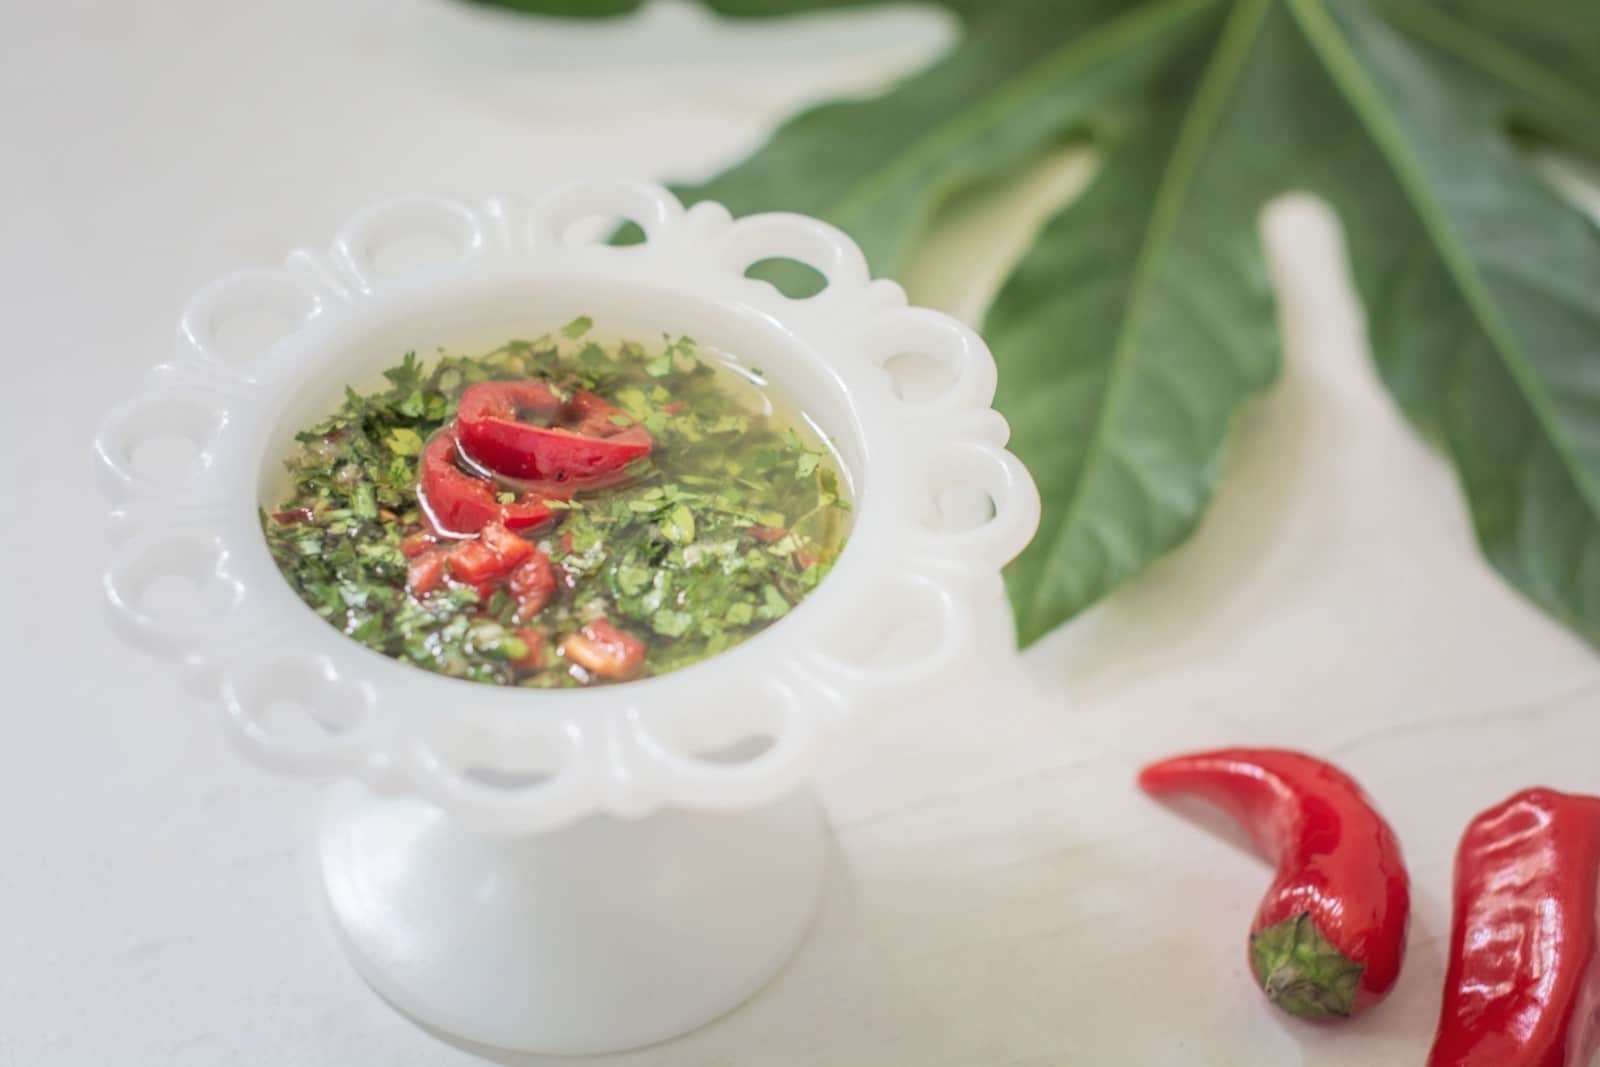 Chimichurri Sauce recipe in a white pedestal bowl with red chili peppers and greenery on white table